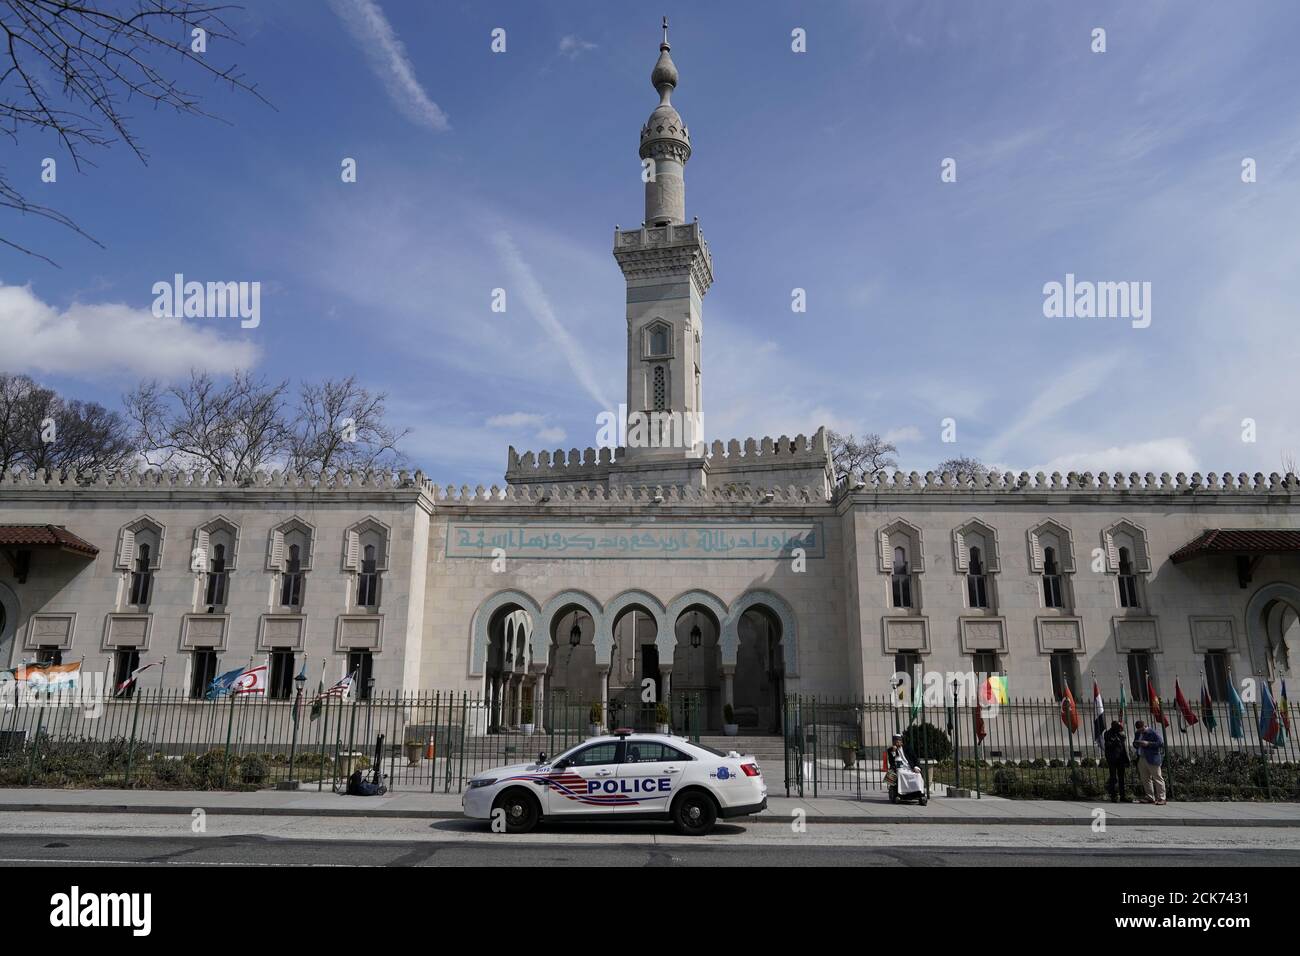 A Metropolitian Police vehicle sits outside of the Islamic Center of Washington in Washington, U.S., following the mosque attacks in New Zealand March 15, 2019. REUTERS/Joshua Roberts Stock Photo